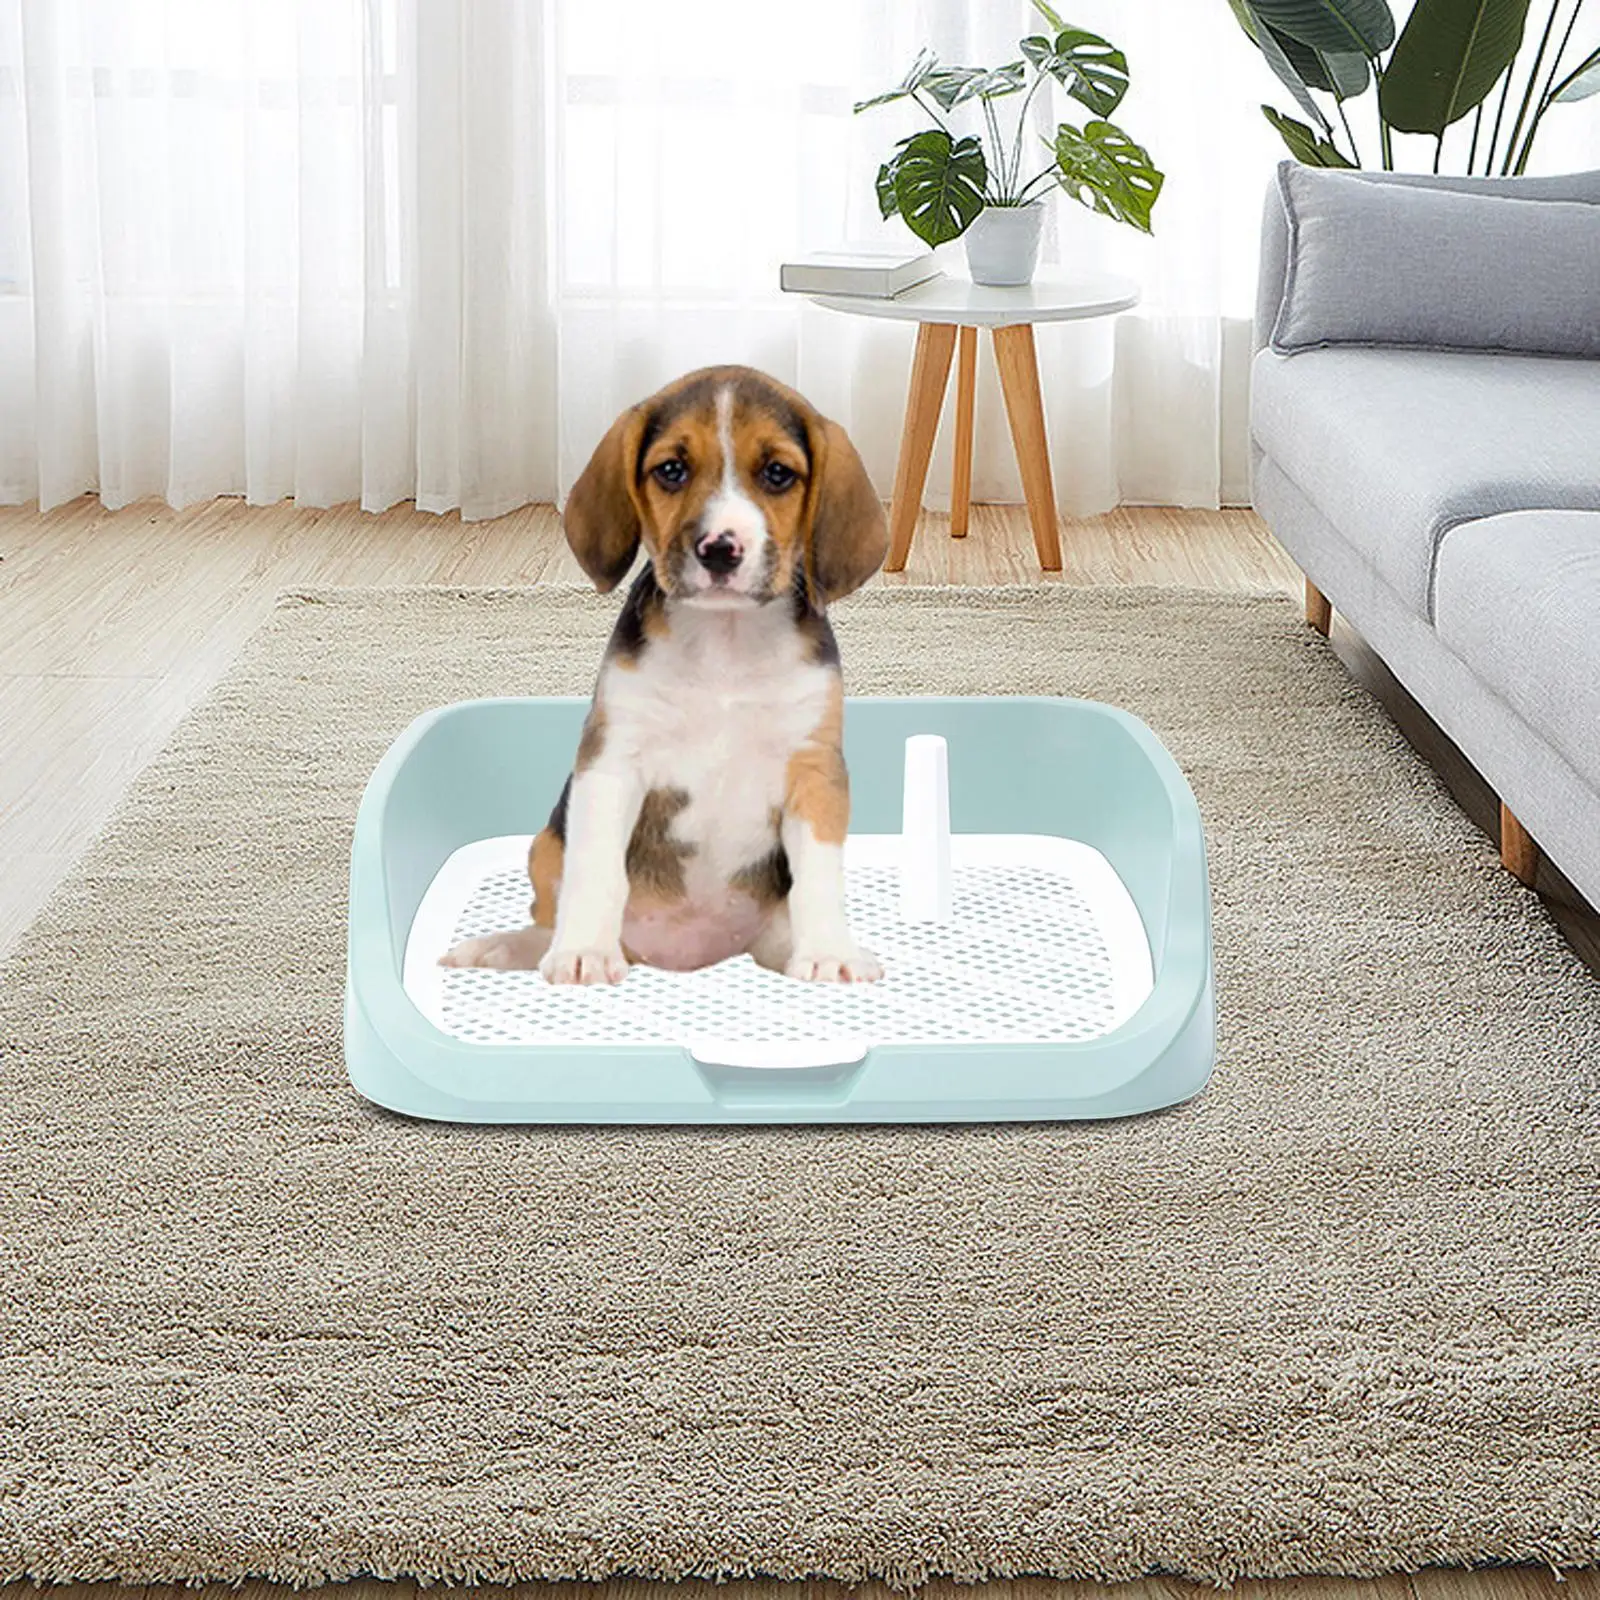 Dog Toilet, Dog Potty Tray Keep Paws and Floors Clean Indoor Pet Pee Toilet